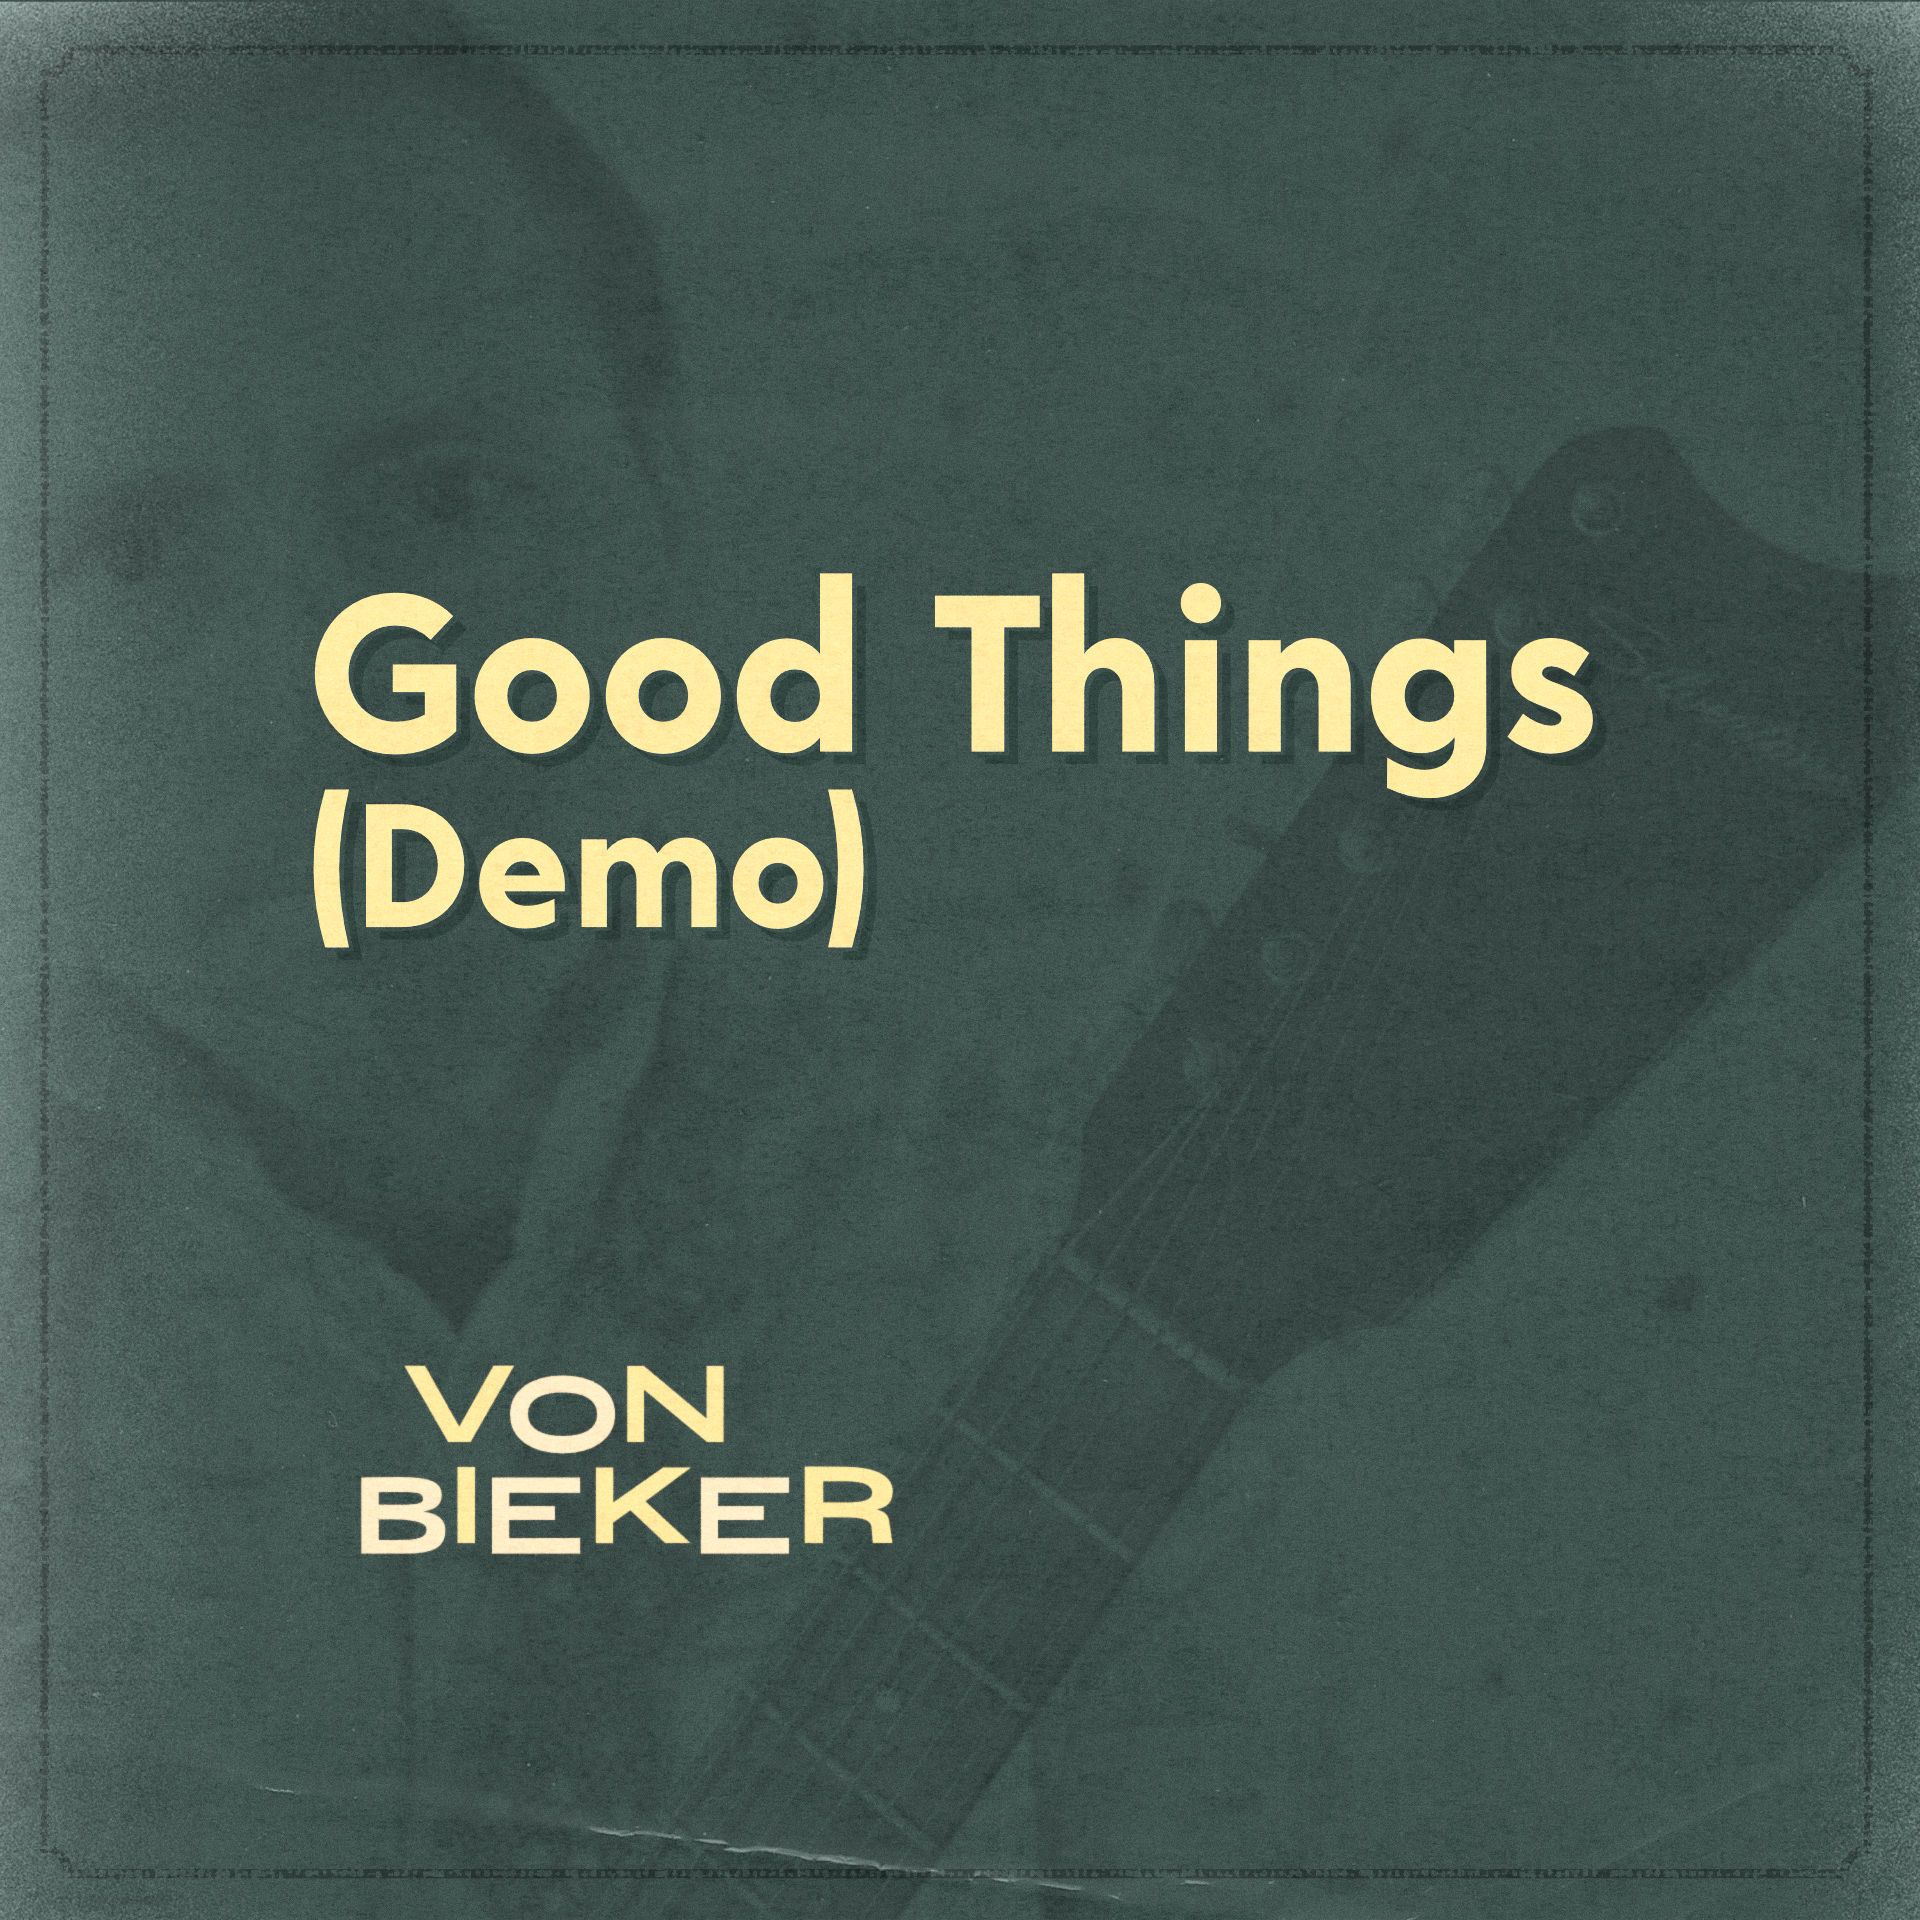 Good Things (early demo) 🎵